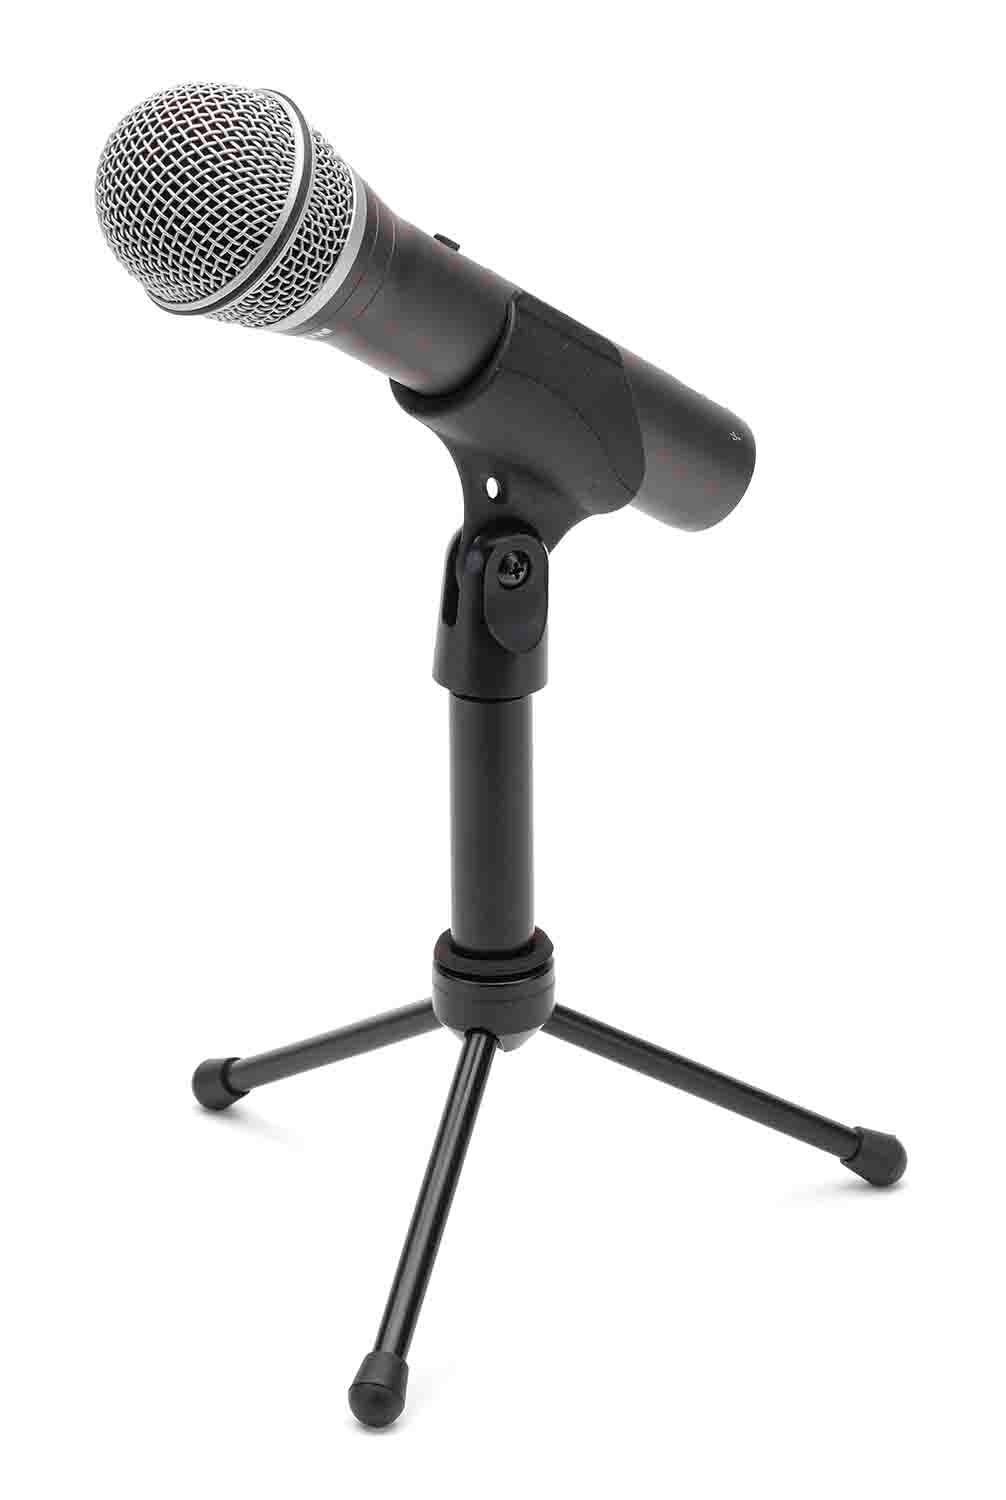 Samson Q2U Recording and Podcasting Pack USB/XLR Dynamic Microphone with Accessories - Hollywood DJ